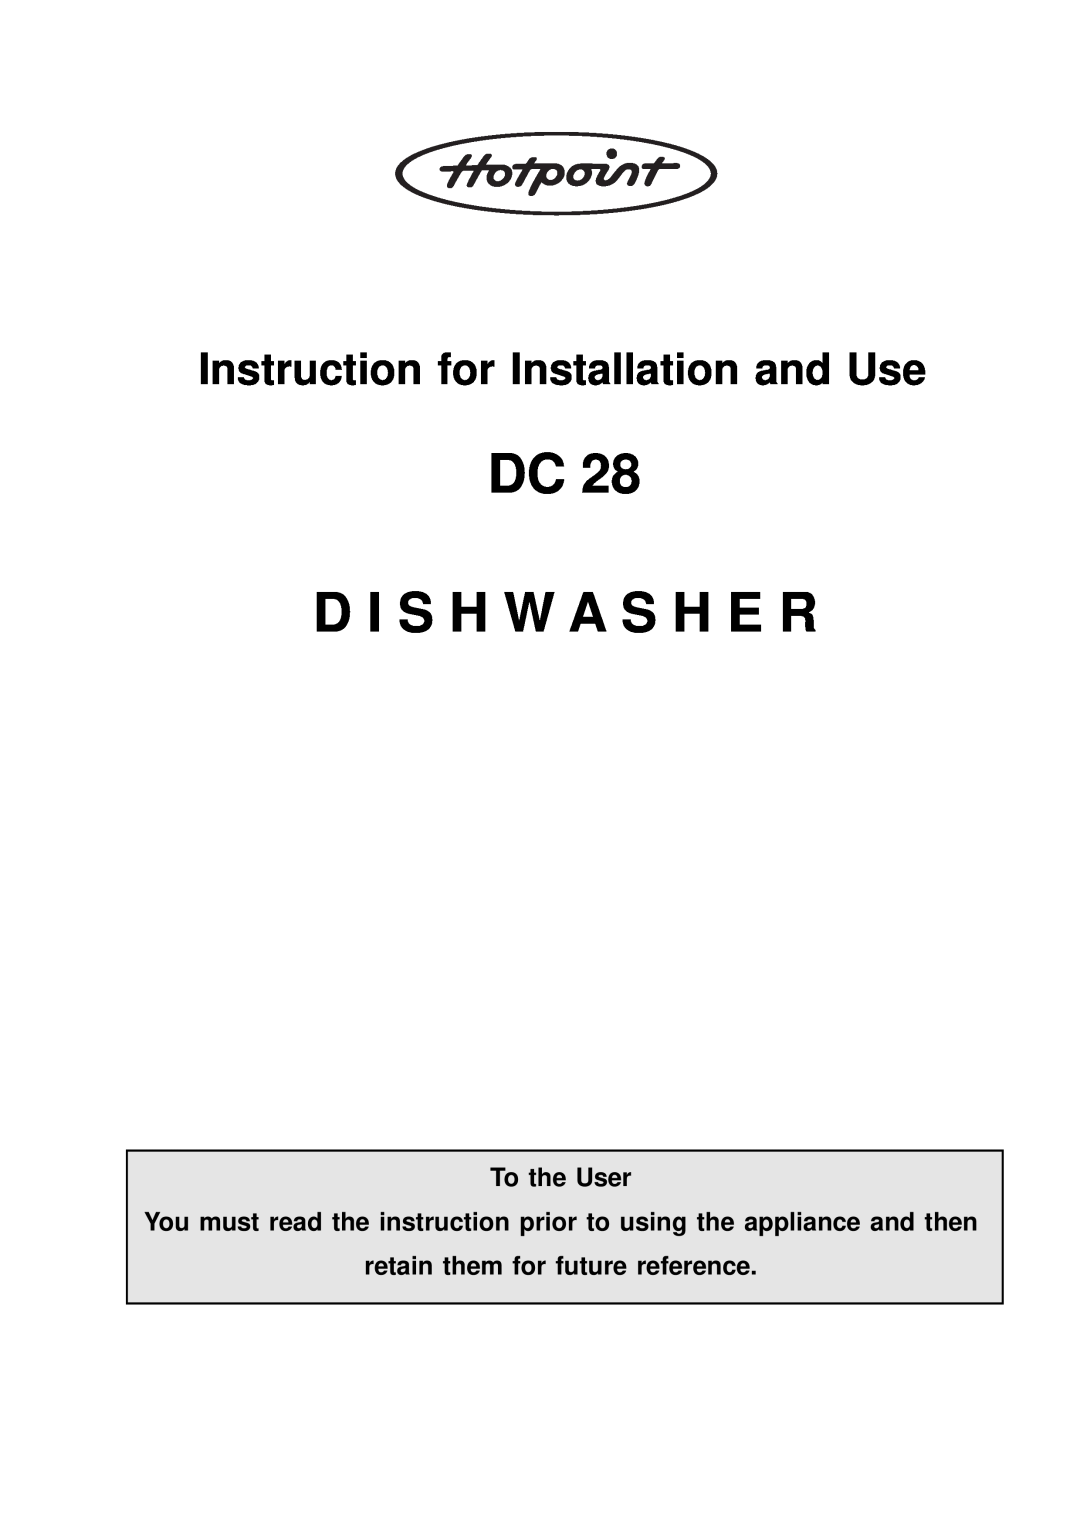 Hotpoint DC 28 manual Dc D I S H W A S H E R, Instruction for Installation and Use, To the User 